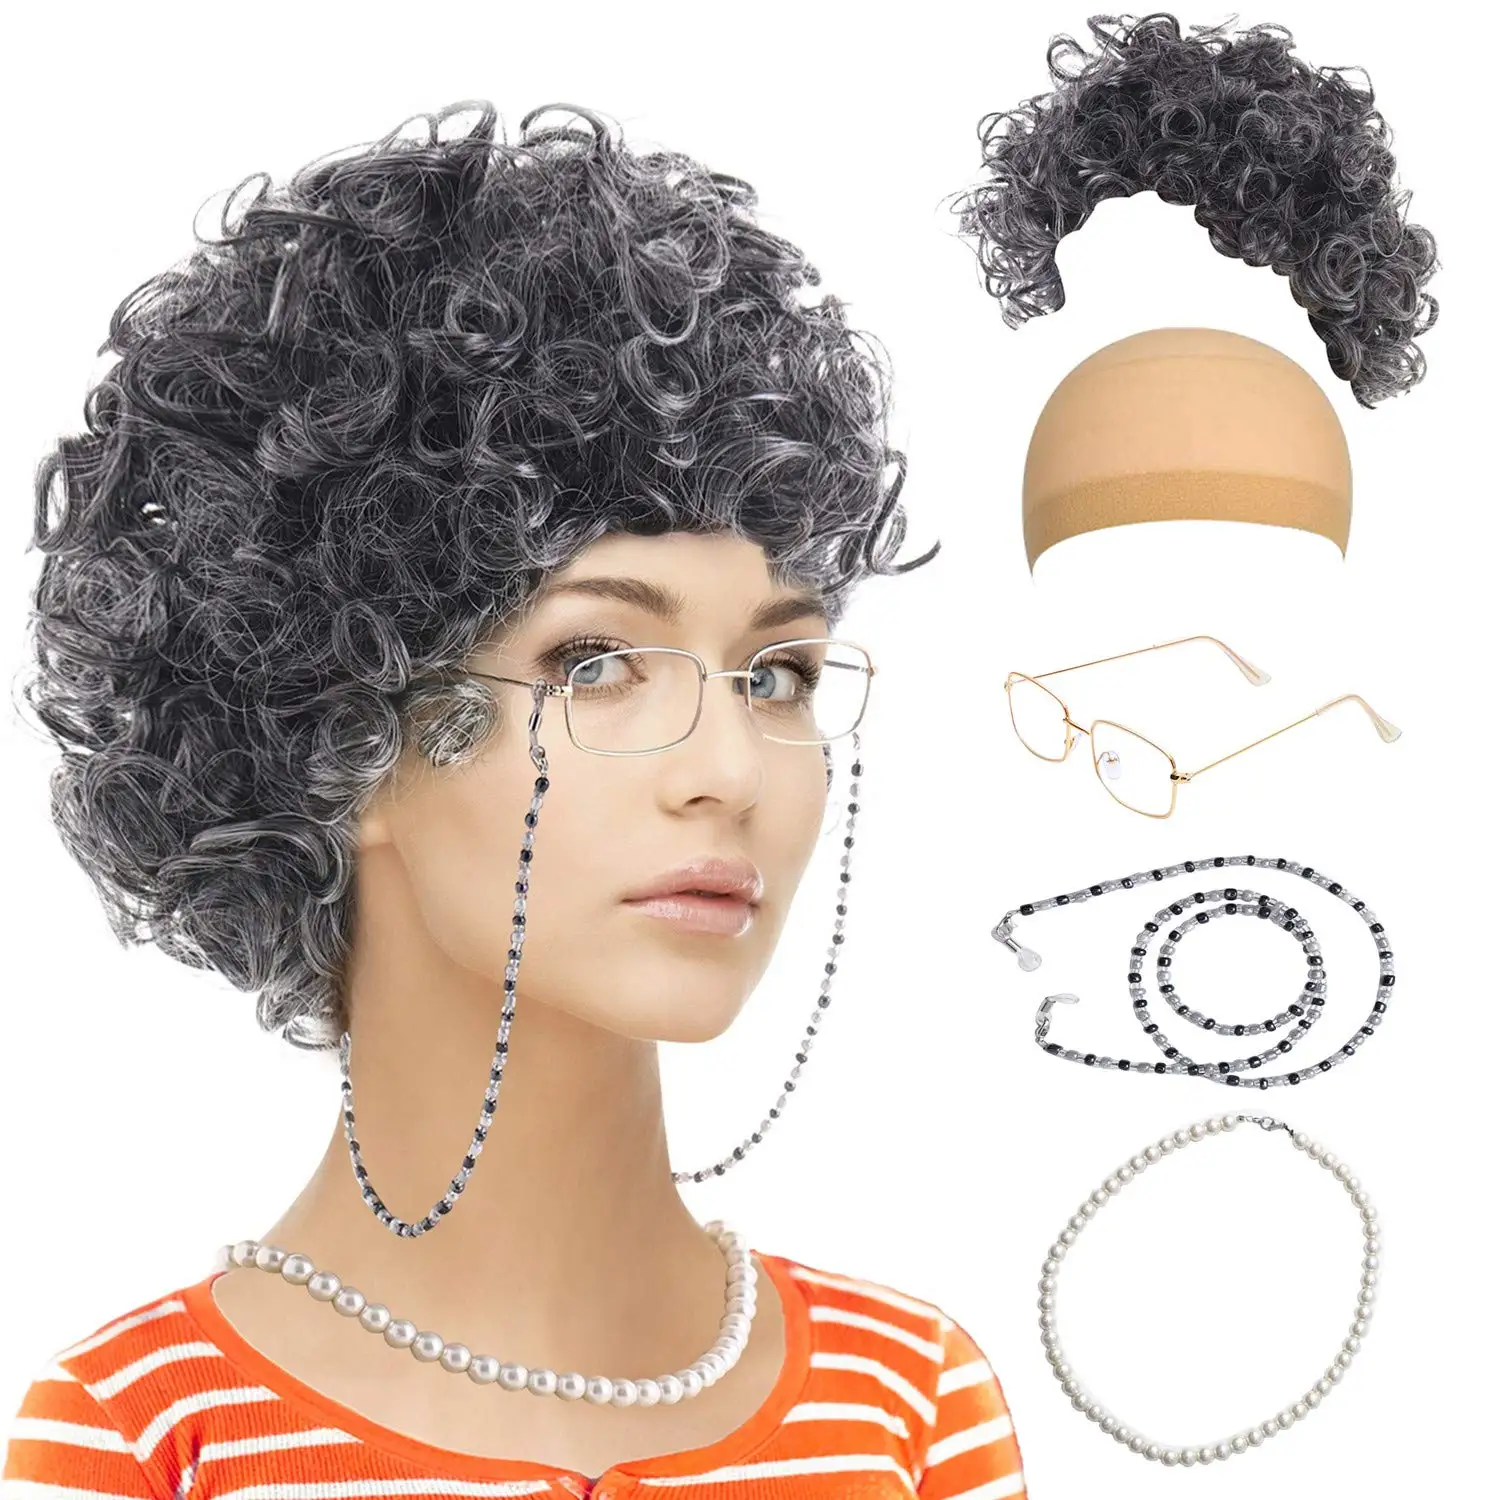 Cosplay Old Lady Costume Set-Grandmother Wig,Wig Caps, Madea Granny Glasses, Eyeglass Retainer Chain,Pearl Necklace(5 Pieces)